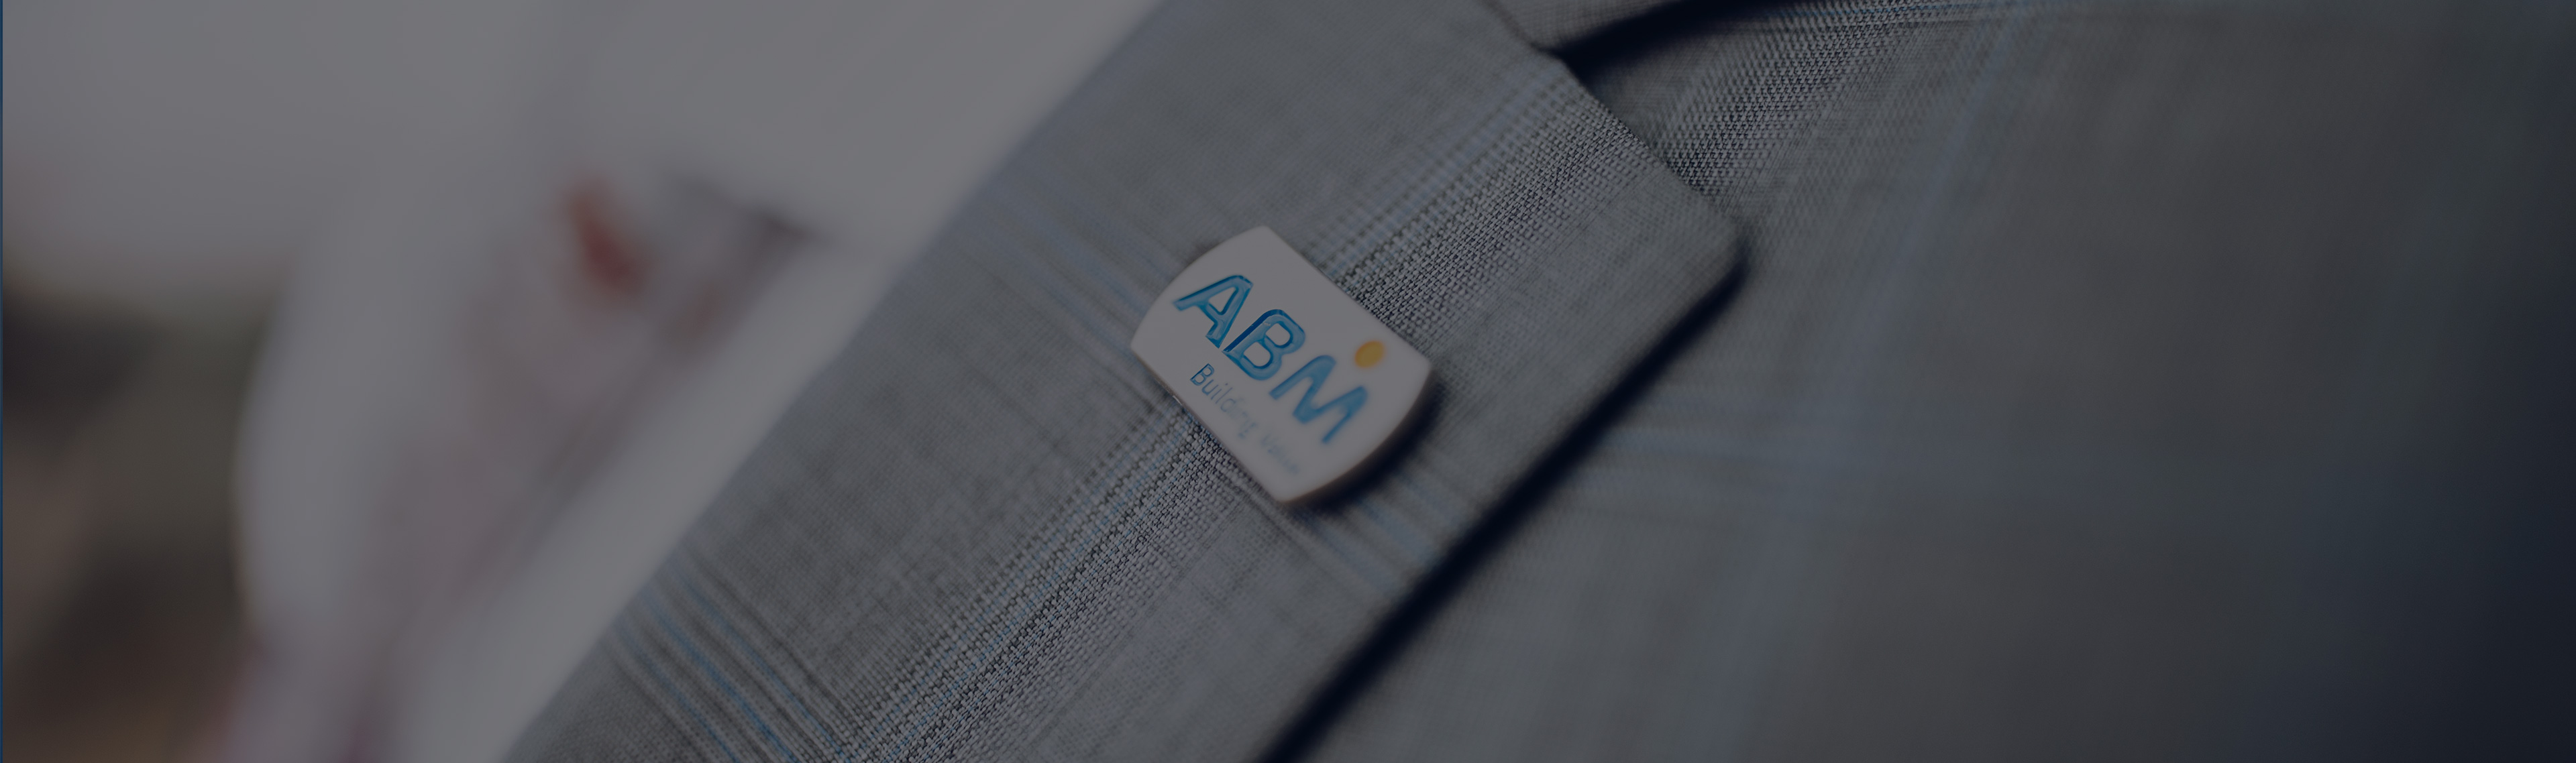 ABM Industries – Facility Service and Maintenance